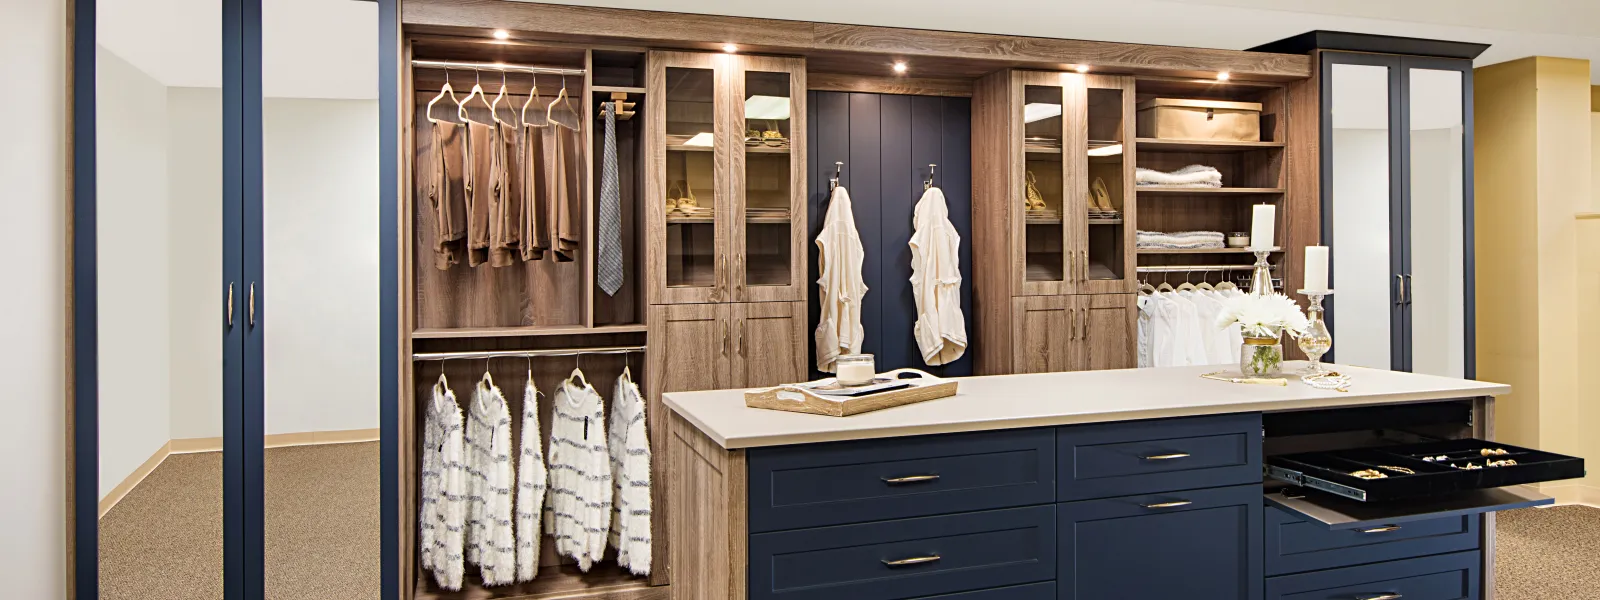 See Your Fantasy Walk-In Closet Come to Life with Artisan